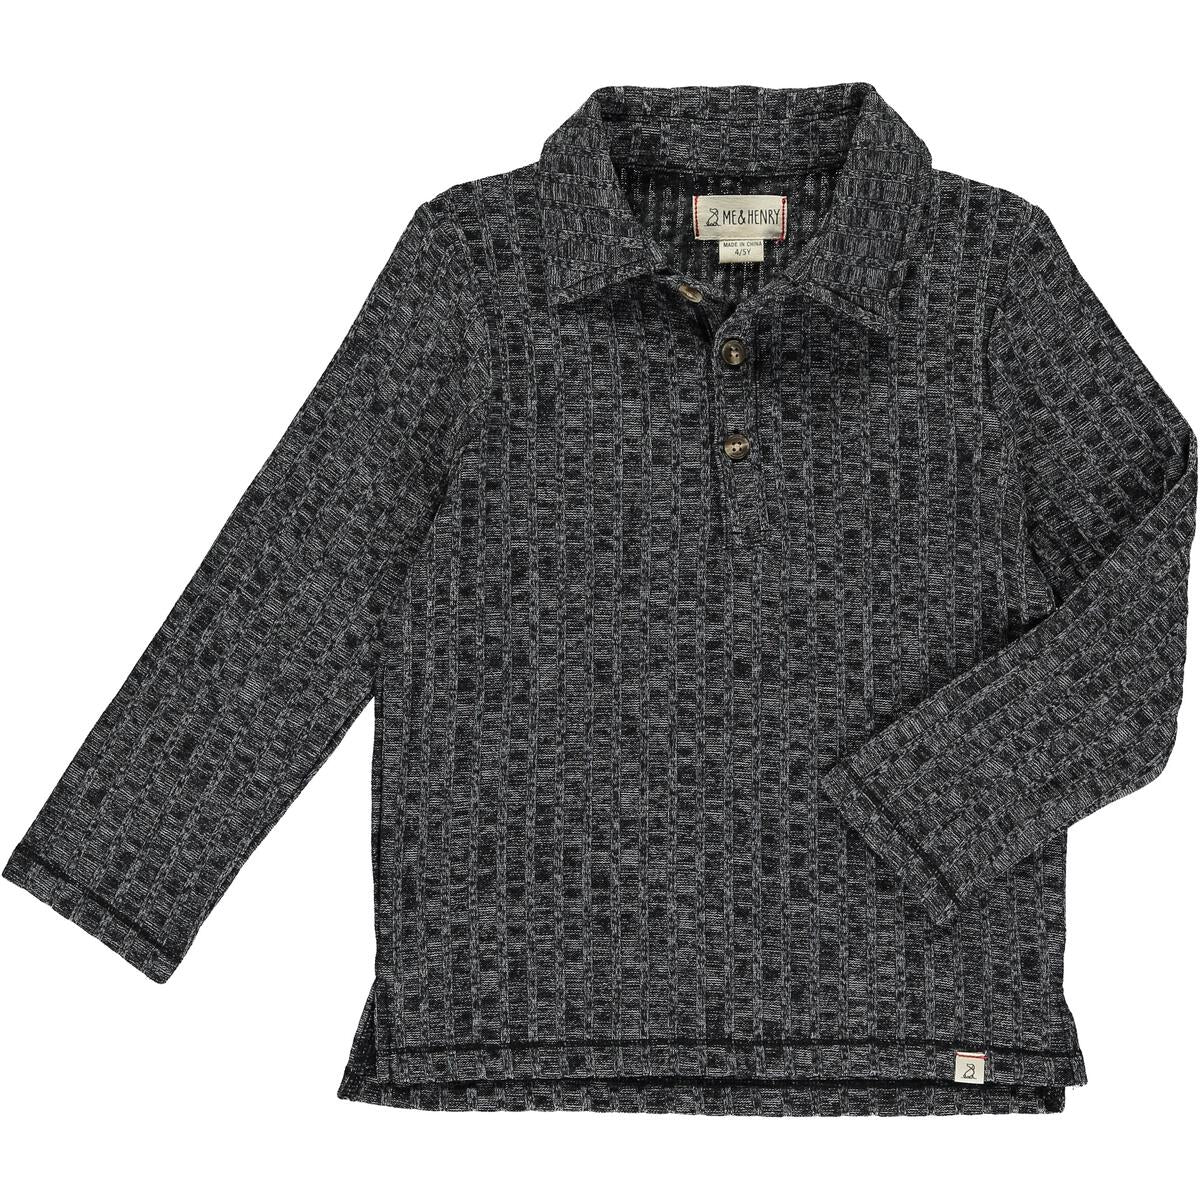 Christian Knitted Polo